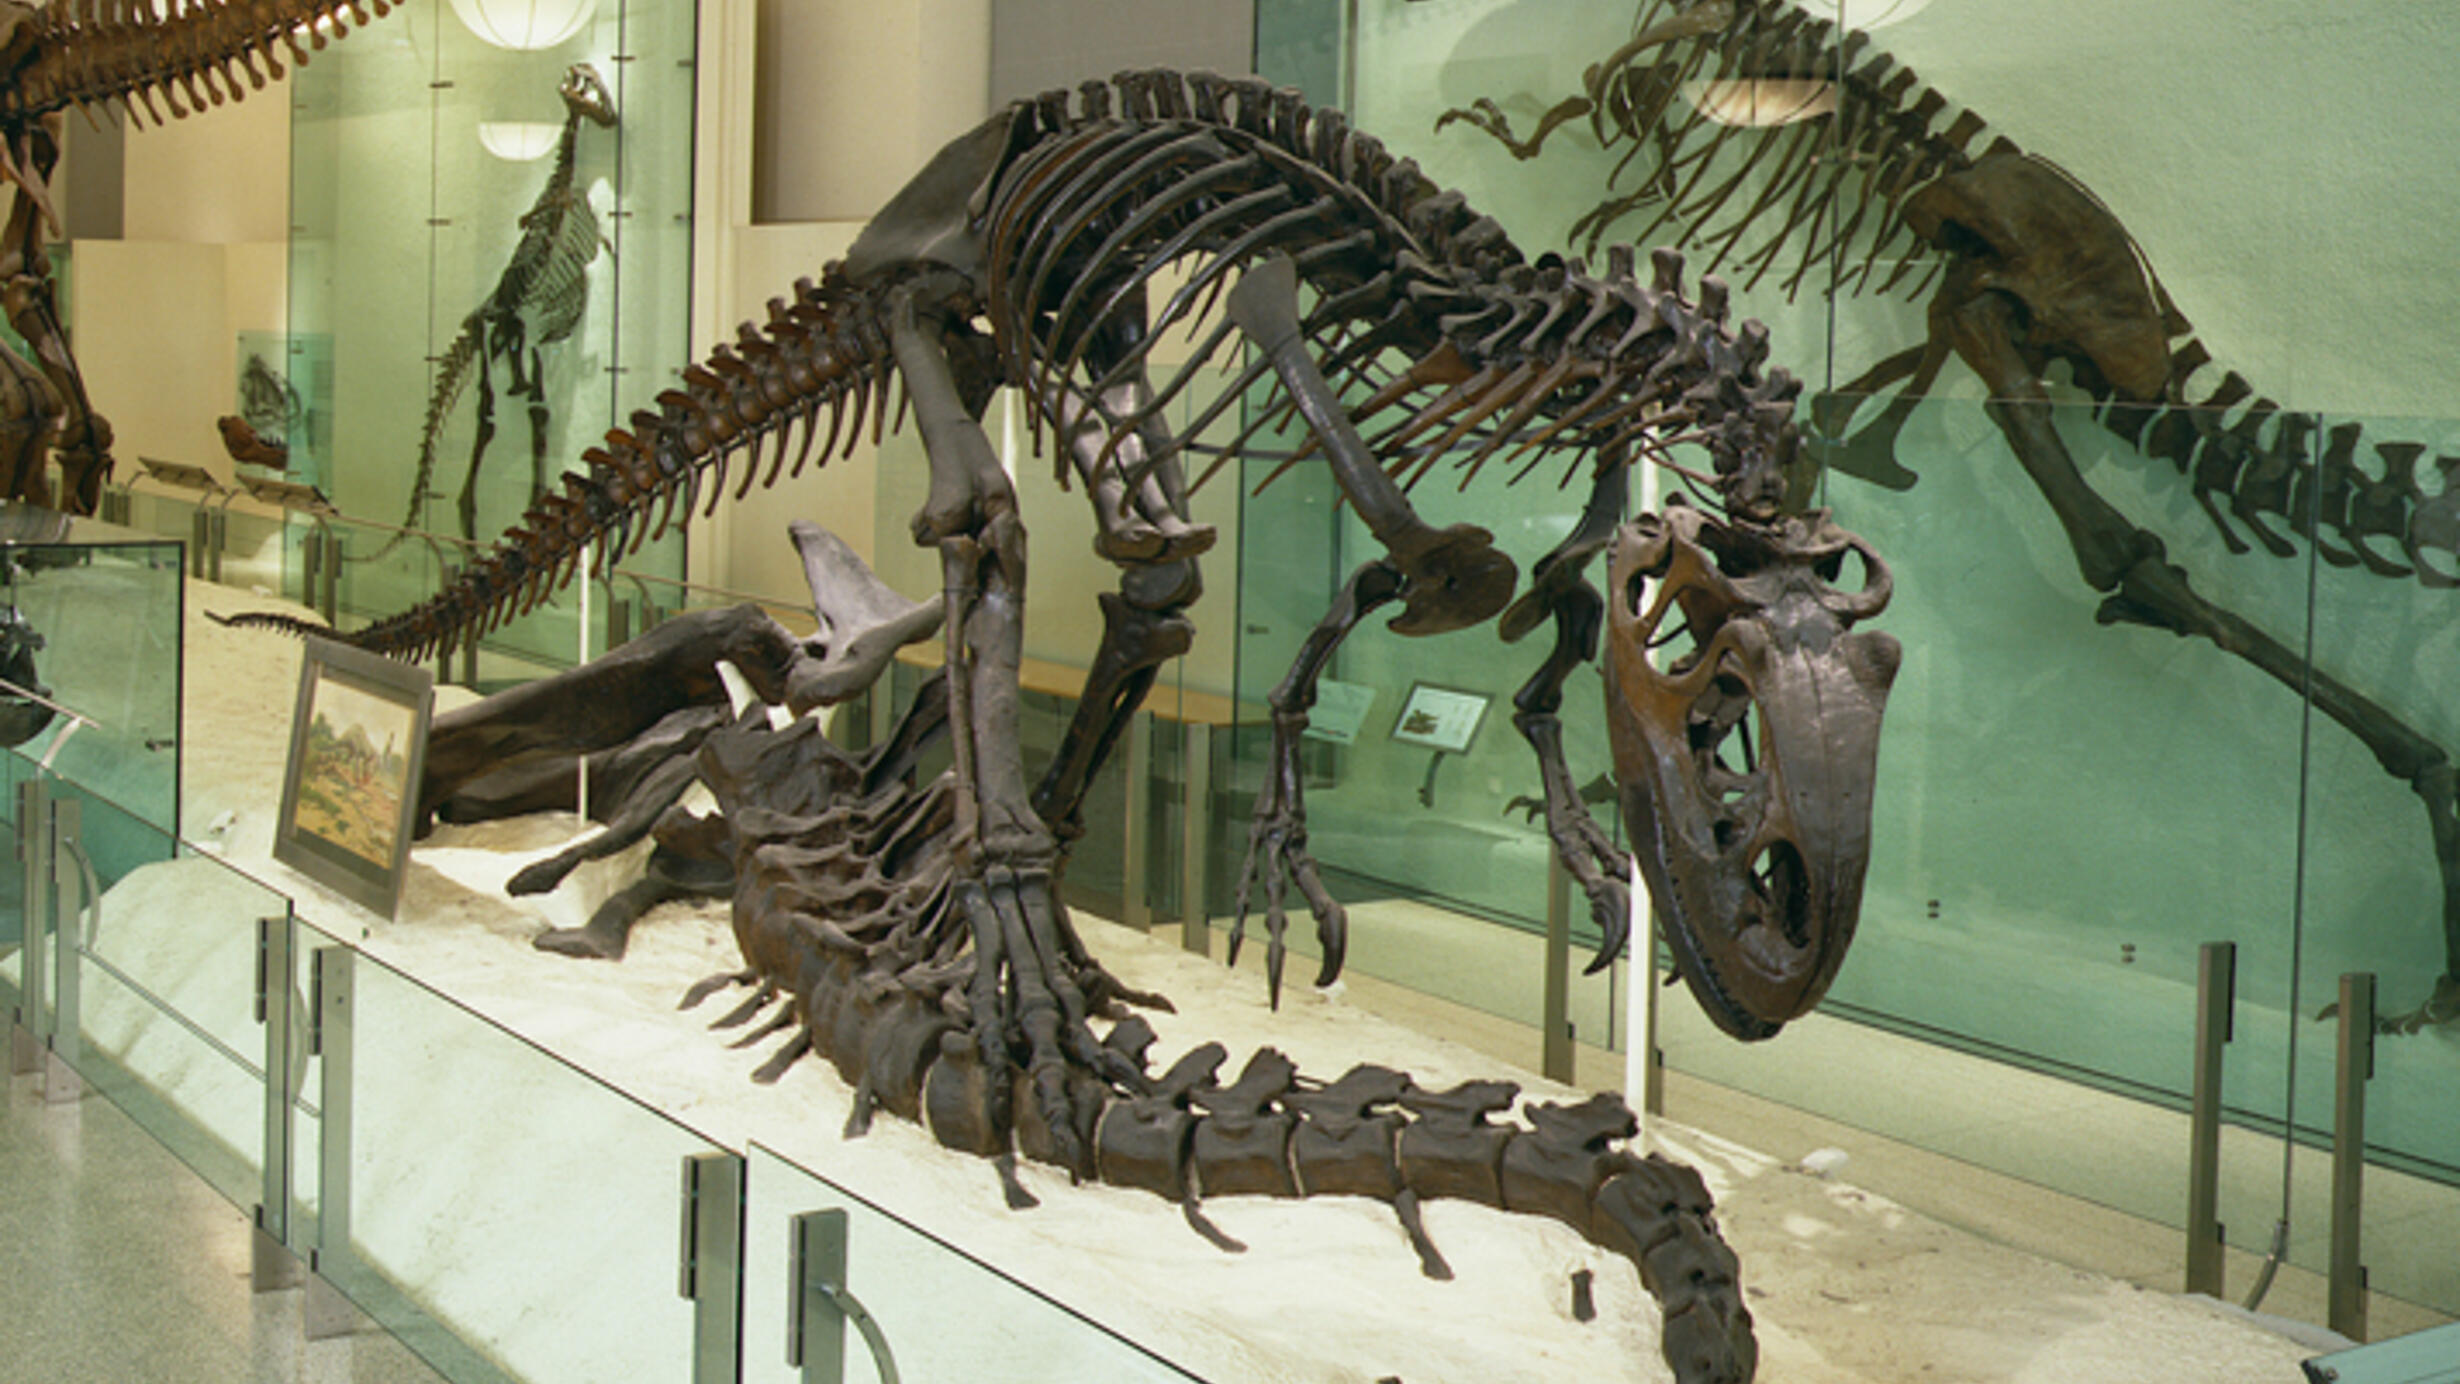 An exhibition of an Allosaurus fossil skeleton mounted dramatically over the partial spine skeleton of its prey.